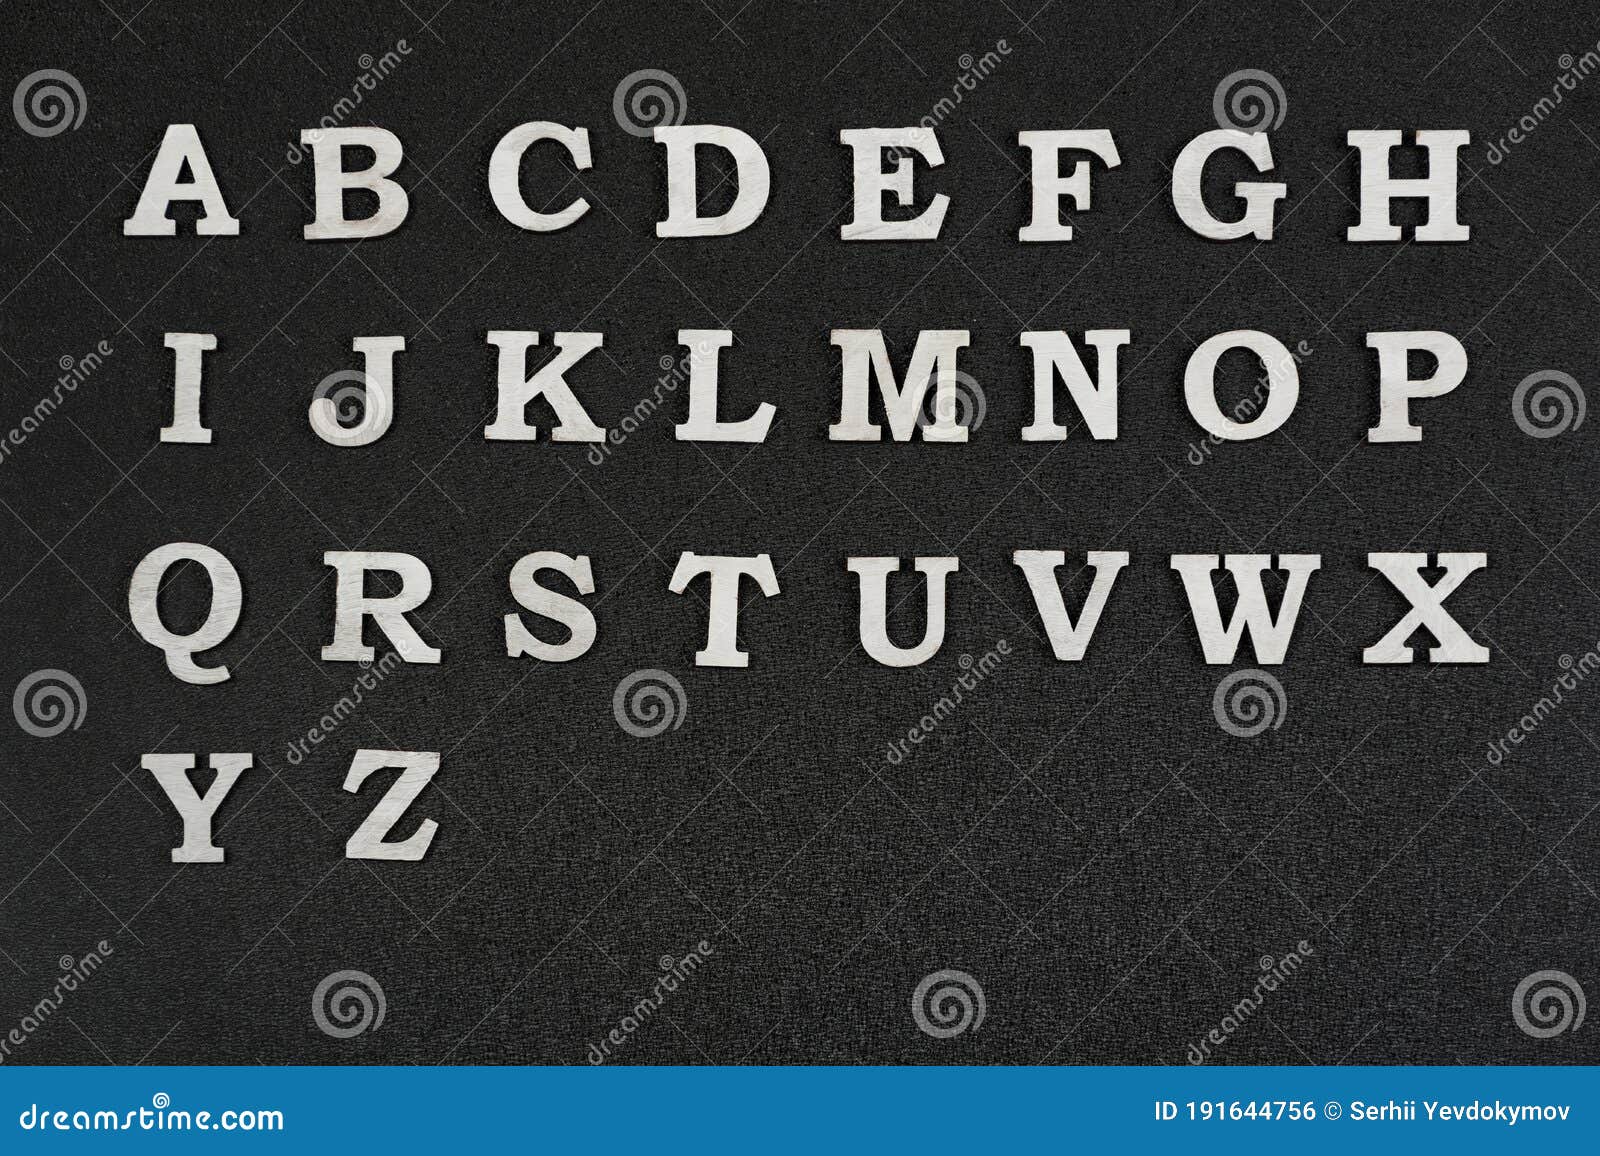 Alphabet Letters On Black Background Letters A Z In Alphabetical Order